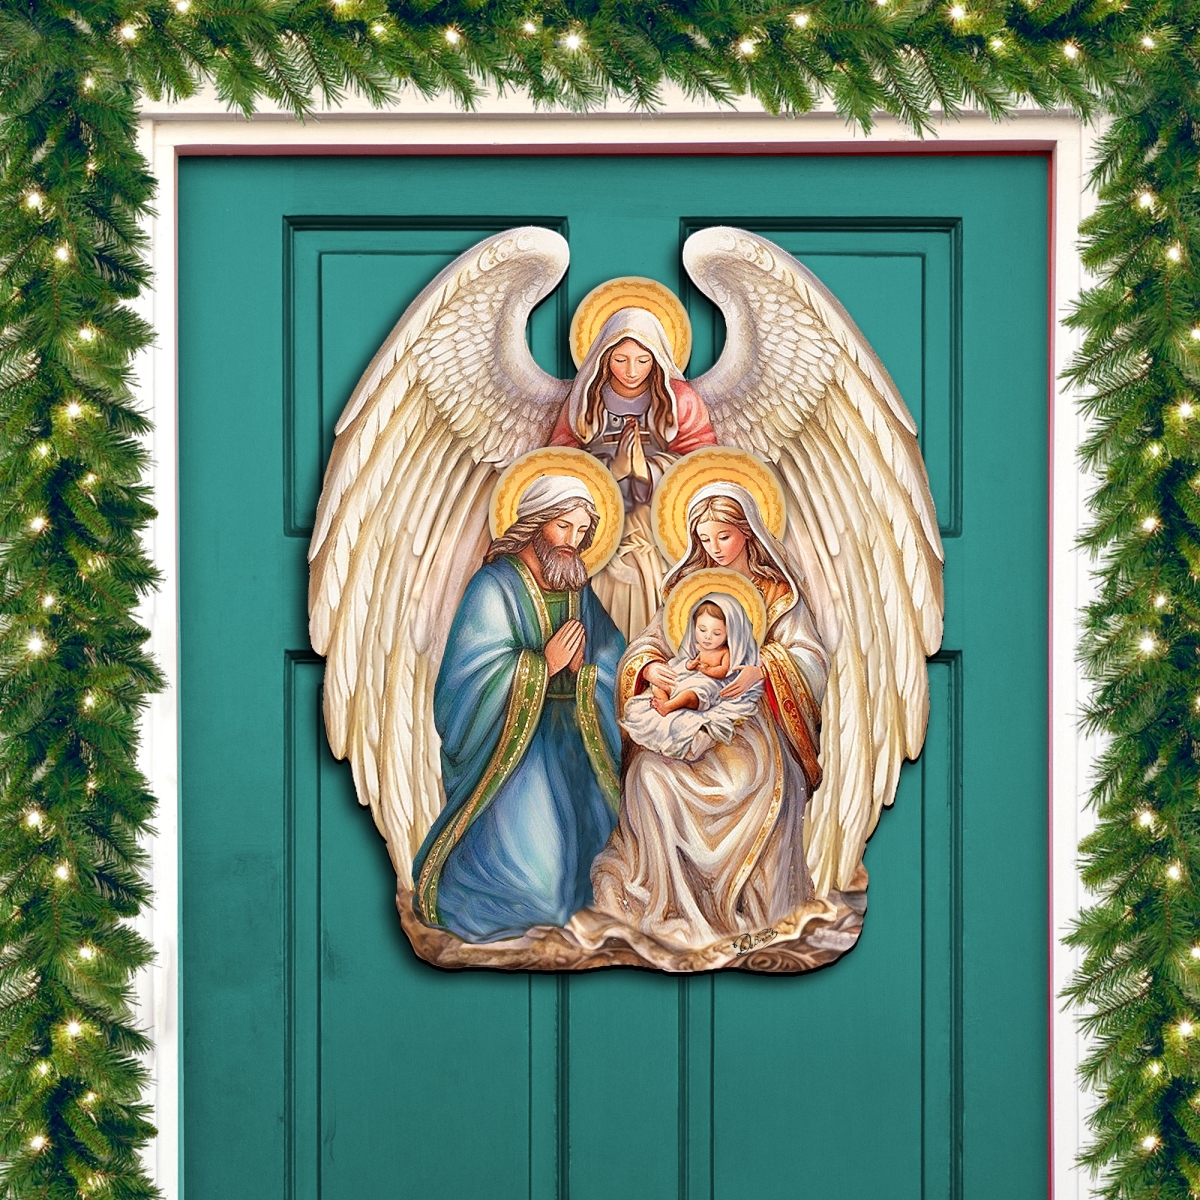 Designocracy 8611056H 24 x 18 in. Nativity with Angel Holiday Christmas Door Decor